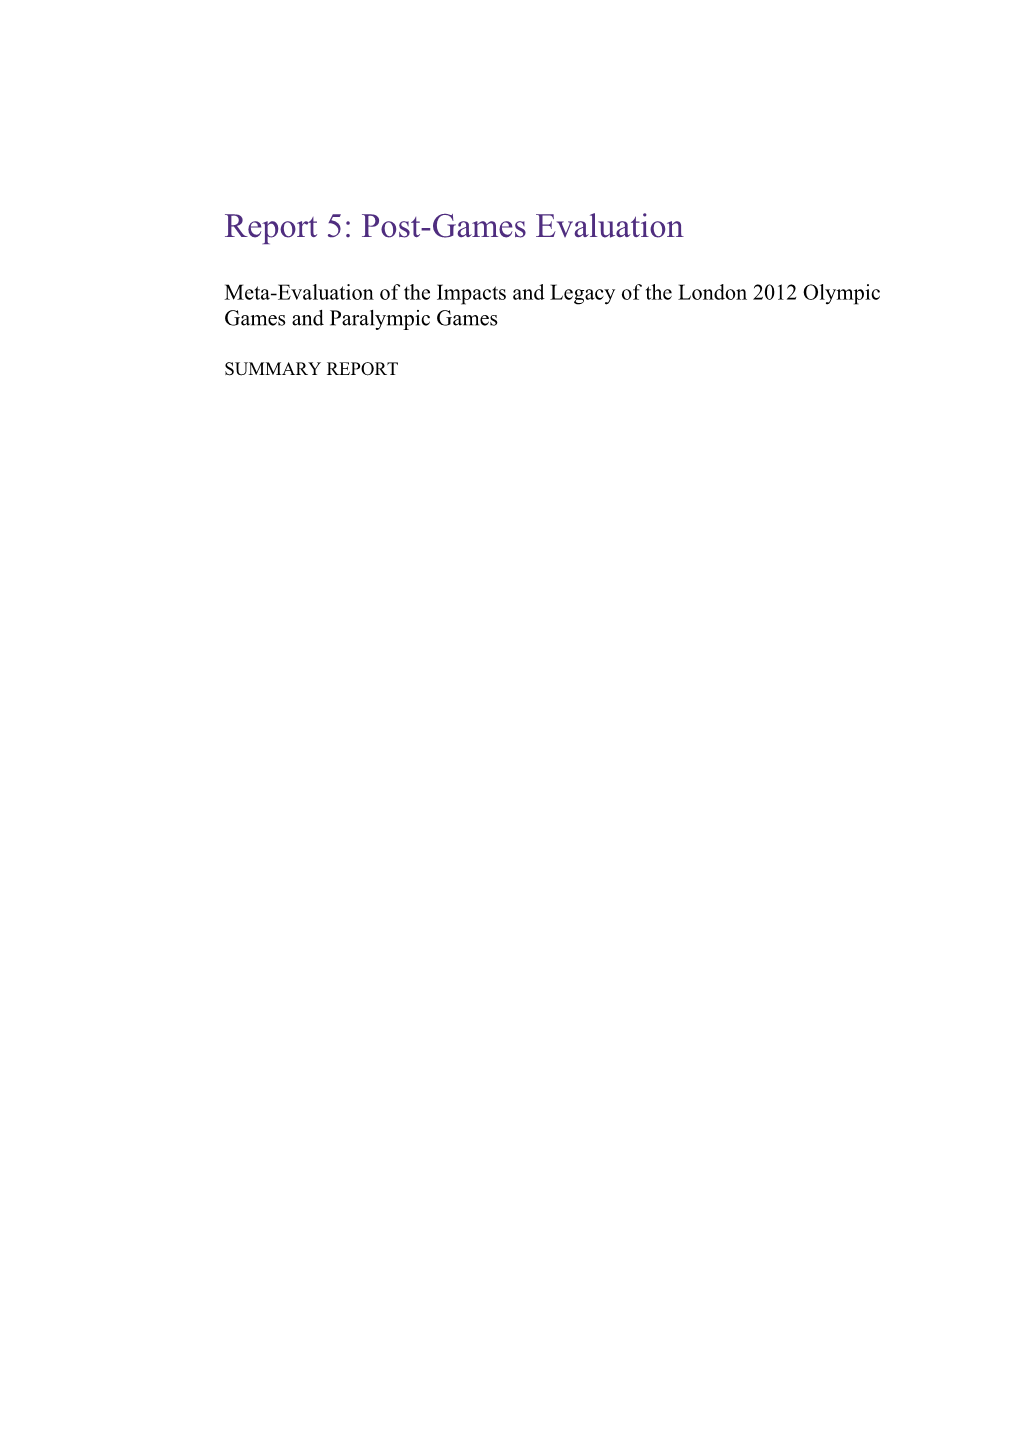 Report 5: Post-Games Evaluation